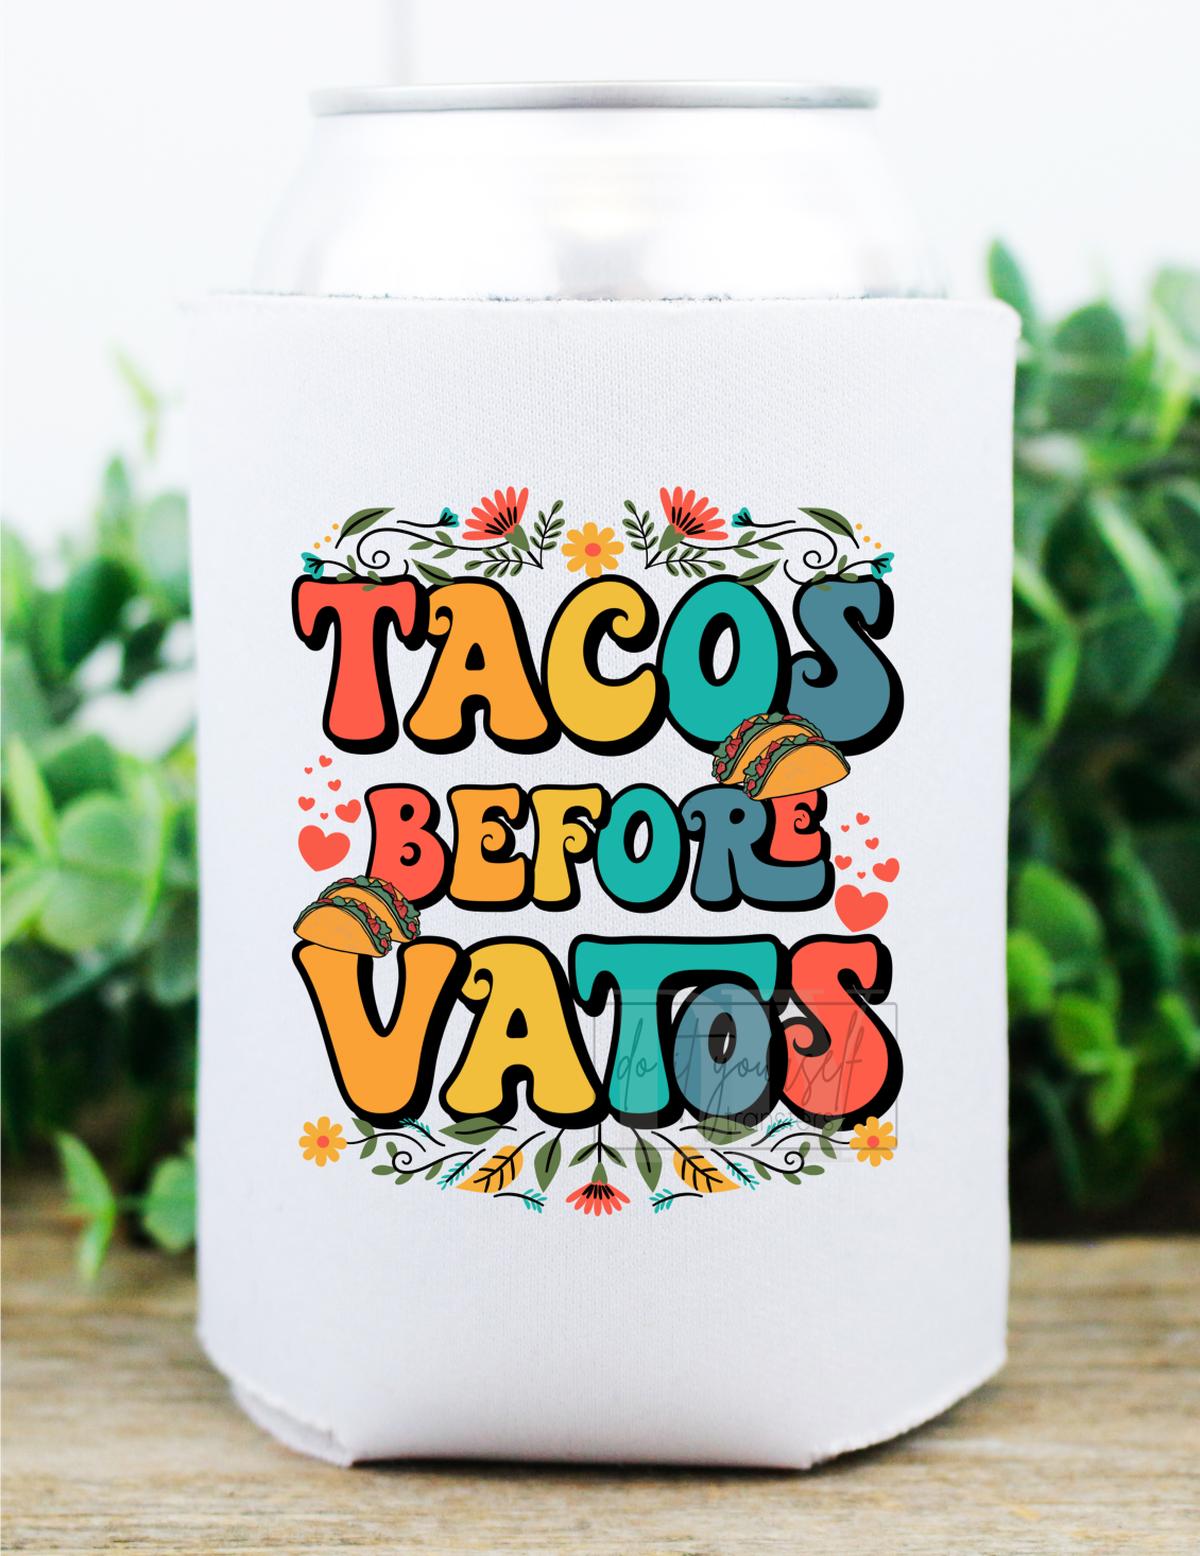 Tacos before Vatos  size   DTF TRANSFERPRINT TO ORDER